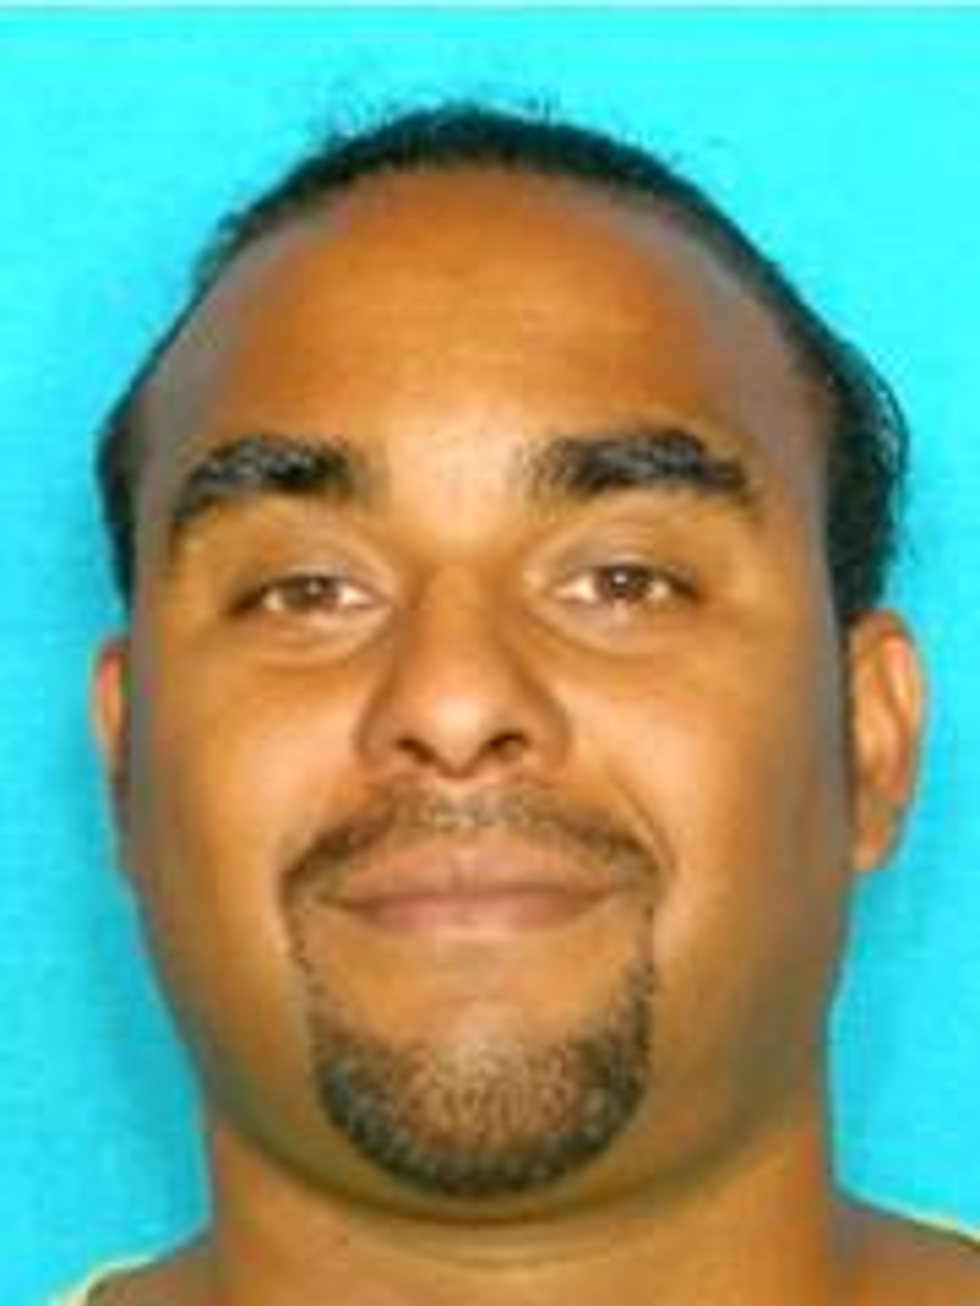 Reward Offered For Top 10 Most Wanted Texas Sex Offender